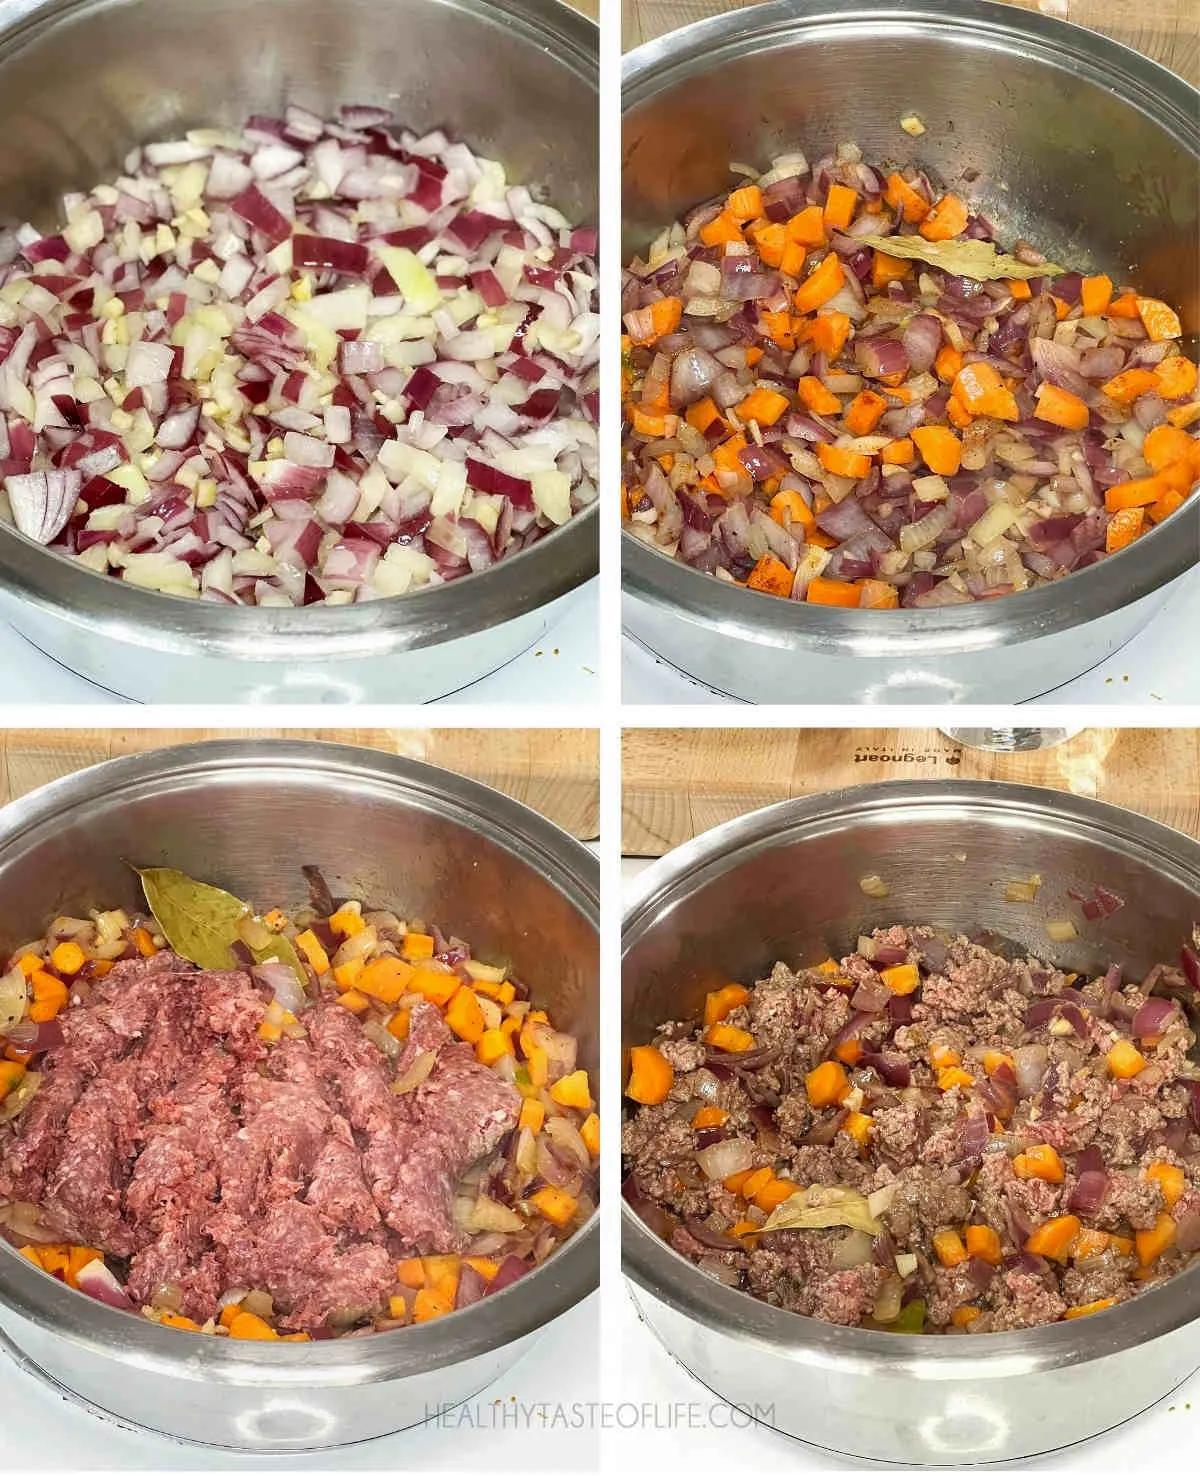 Process pictures showing how to make  lazy cabbage roll casserole: first cooking the veggies until slighlty golden or translucent then adding the ground beef.